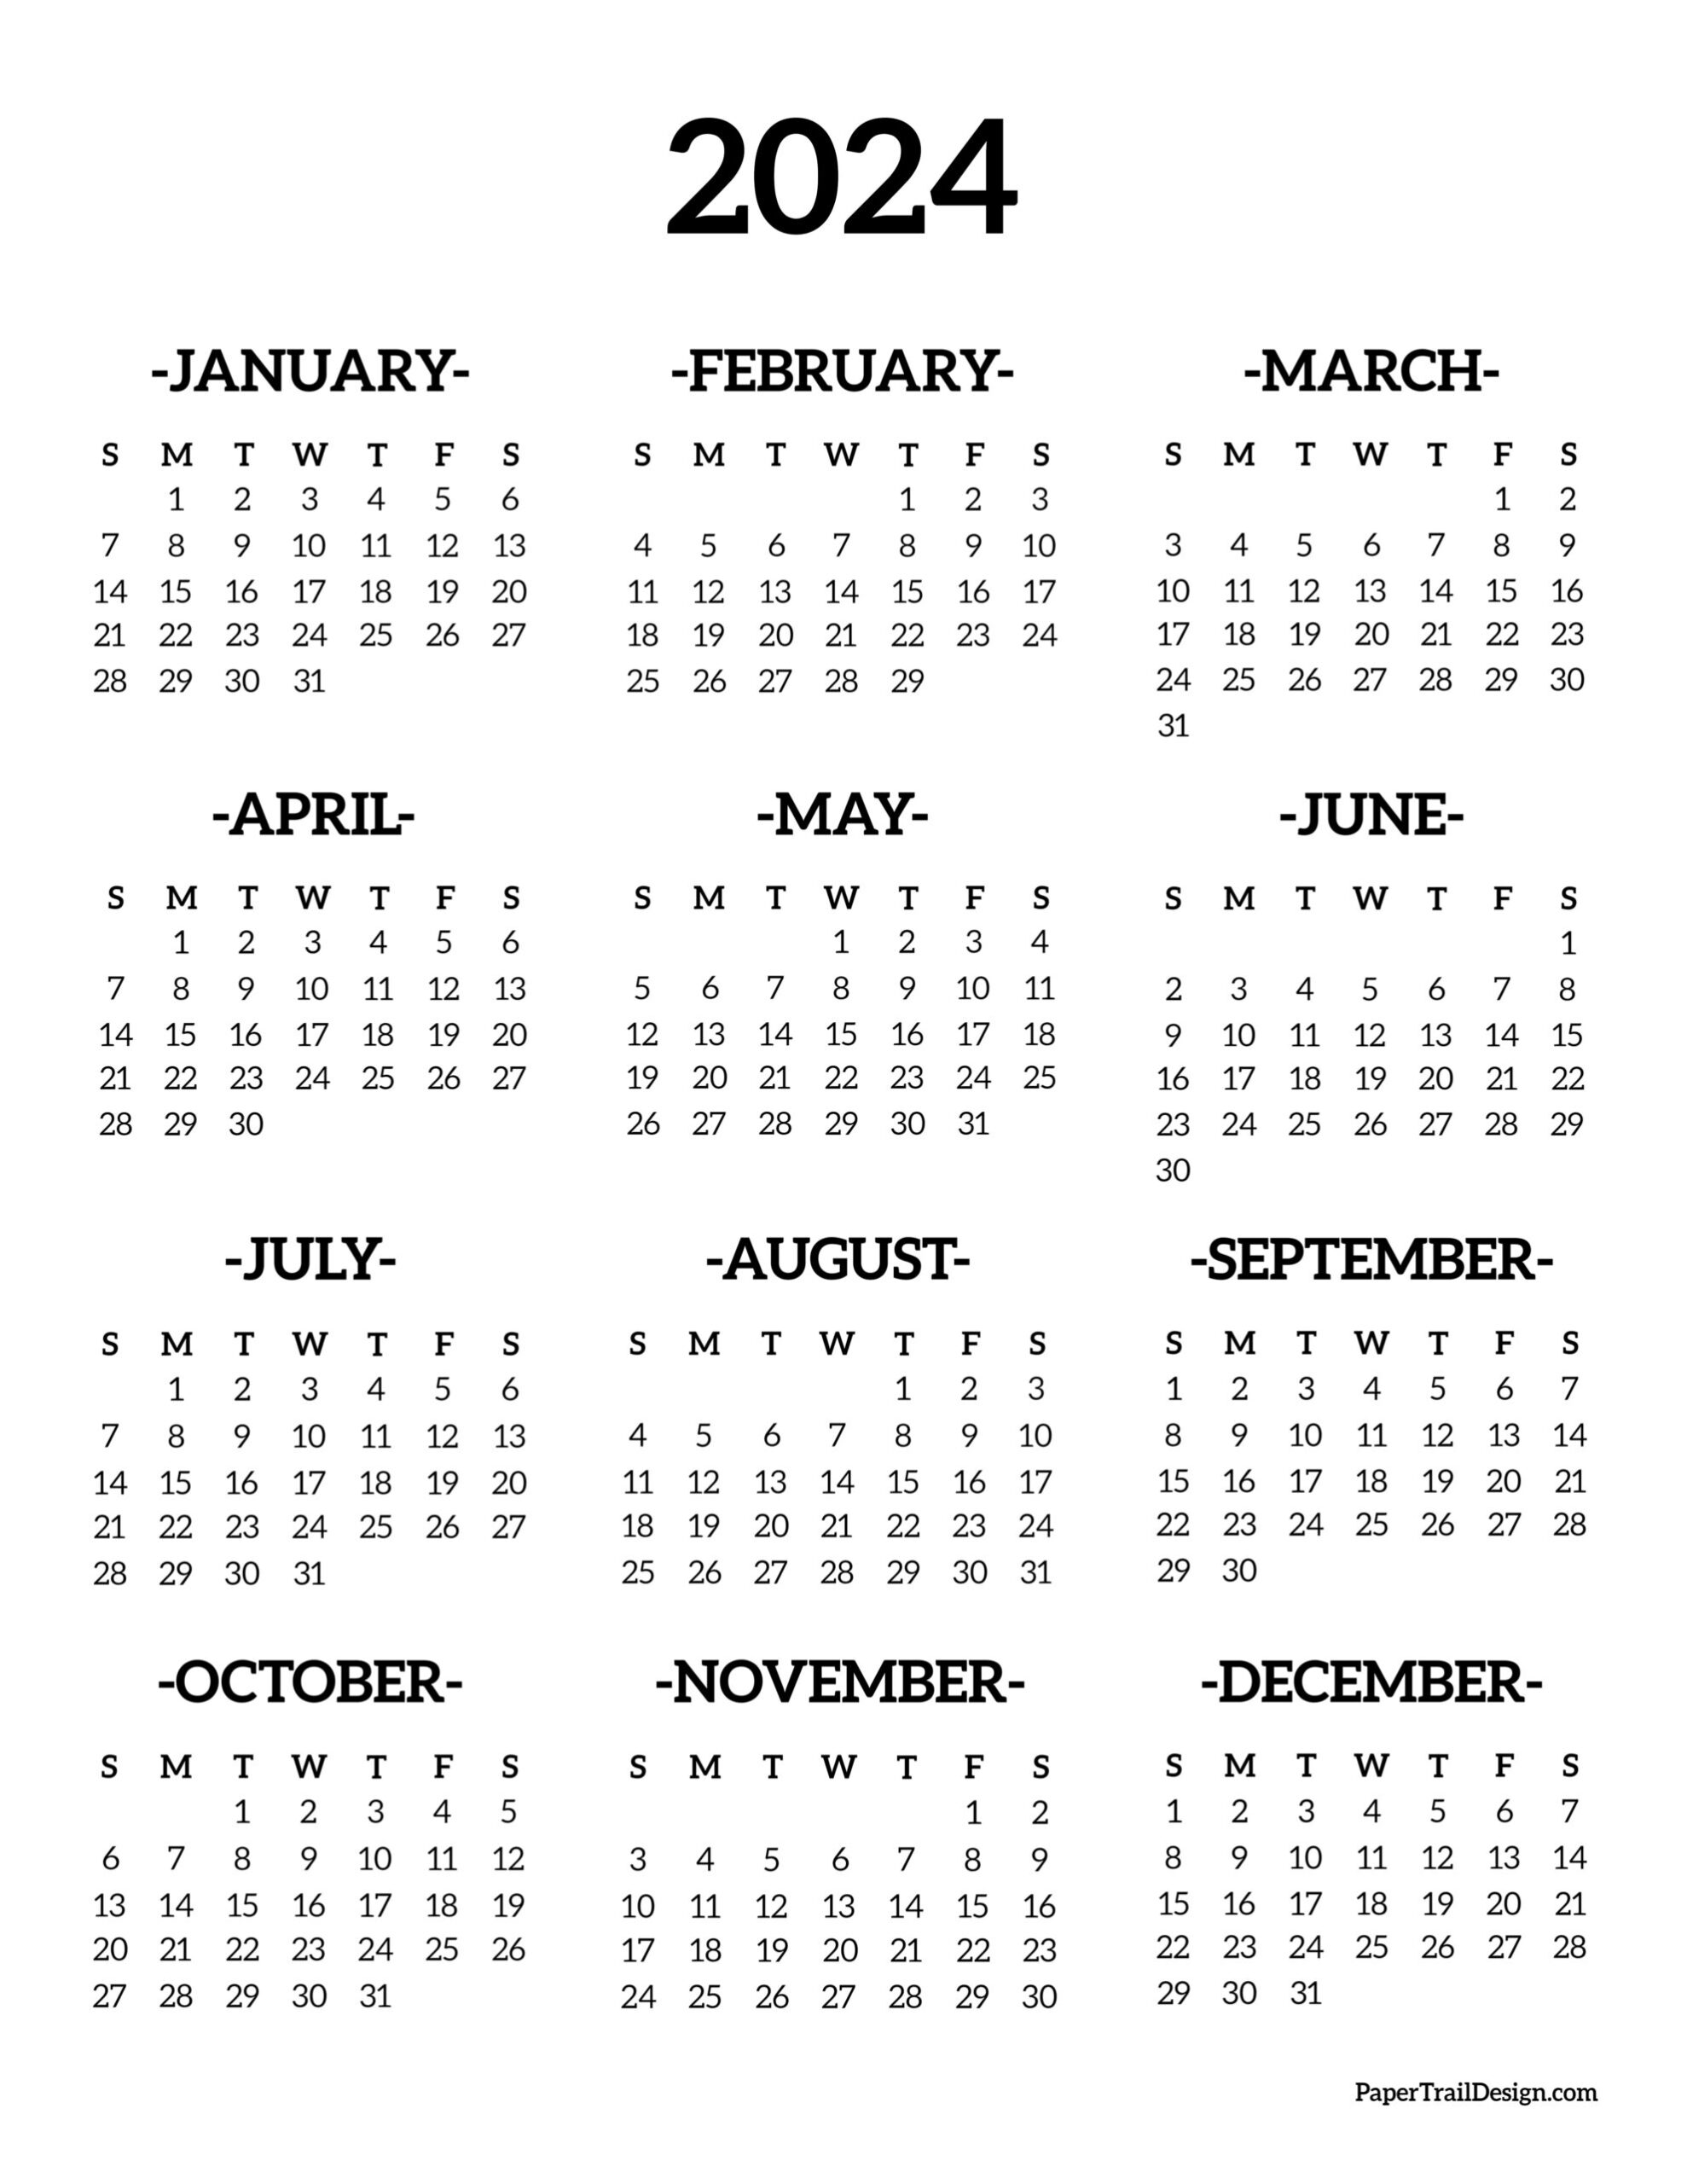 Calendar 2024 Printable One Page - Paper Trail Design for 2024 Year At A Glance Calendar Printable Free